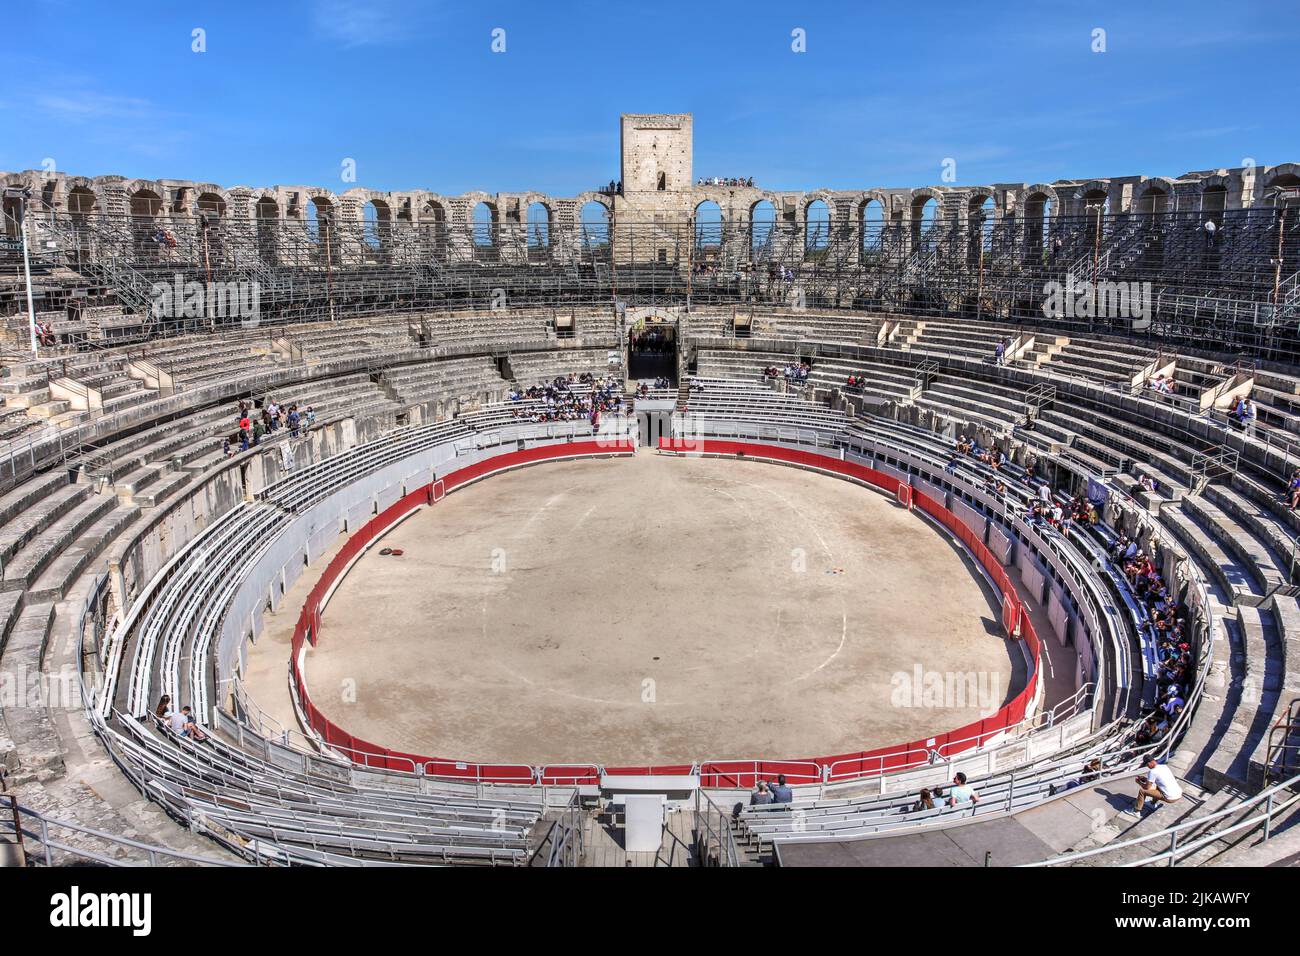 Arles Amphitheatre (Arènes d'Arles) in the south of France dates back to 90 AD and is built to house 20'000 spectators. Interestingly, the structure w Stock Photo